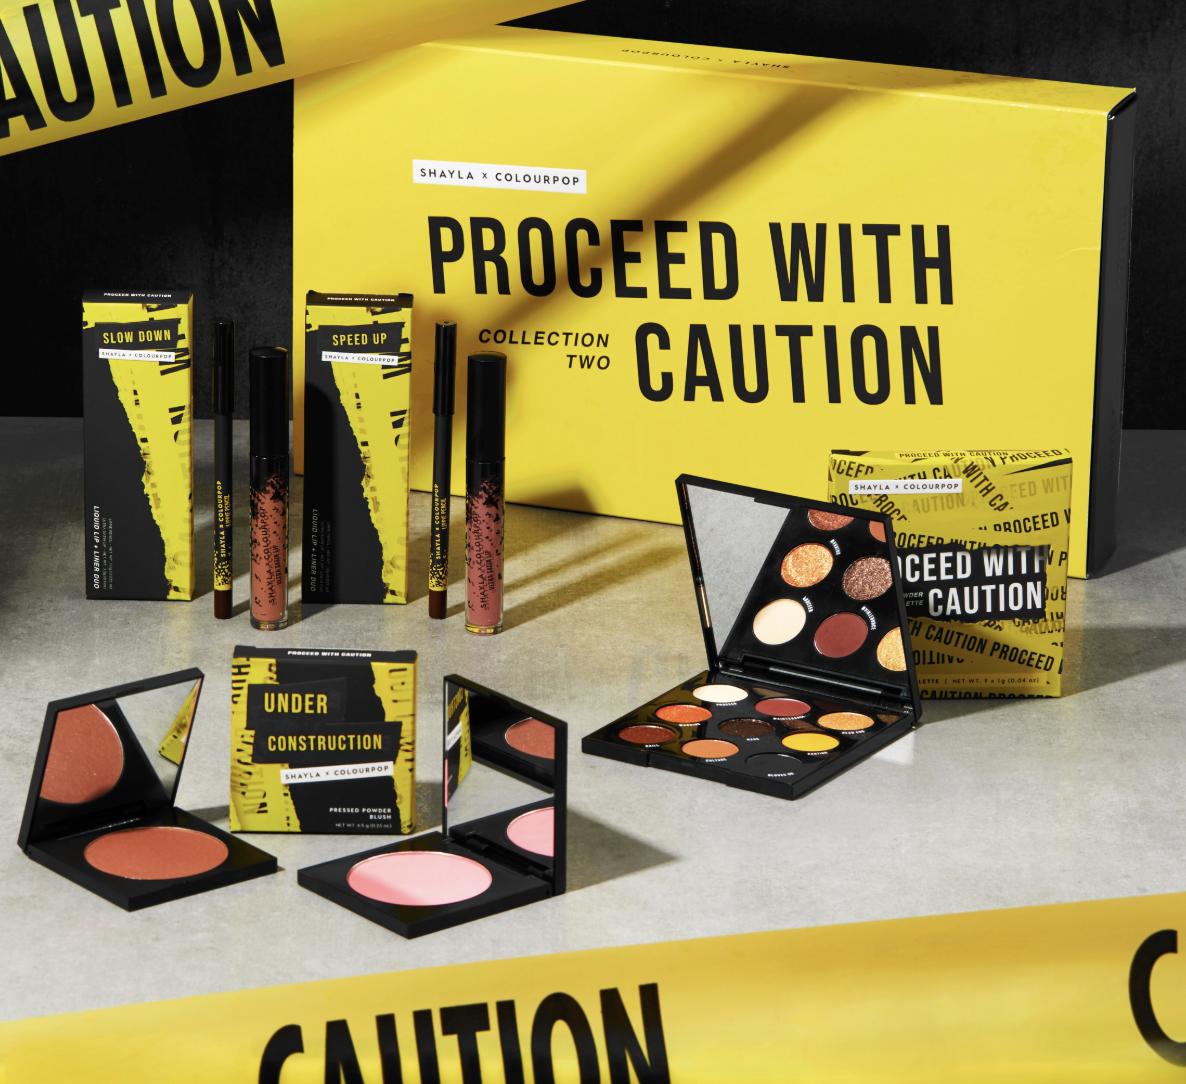 🚧 #ShaylaxColourpop Giveaway 🚧 FRI-YAY is here, that means it's giveaway time! We are giving away @MakeupShayla's Proceed with Caution PR collection to 2 lucky winners! To Enter: 🚧 Follow @ColourPopCo 🚧Like & RT